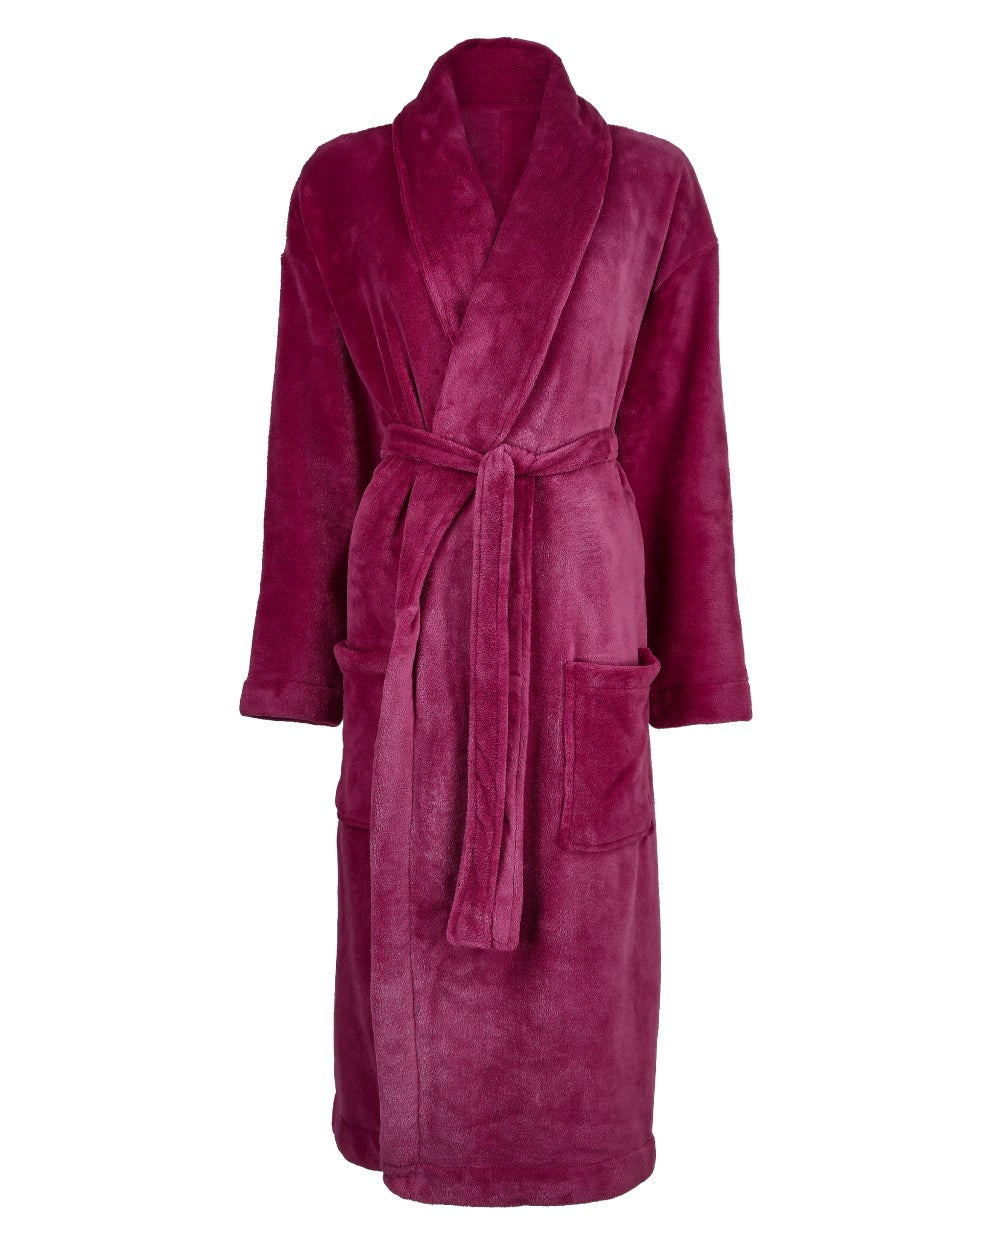 Pink Coloured Champion Ava Fleece Dressing Gown On A White Background 